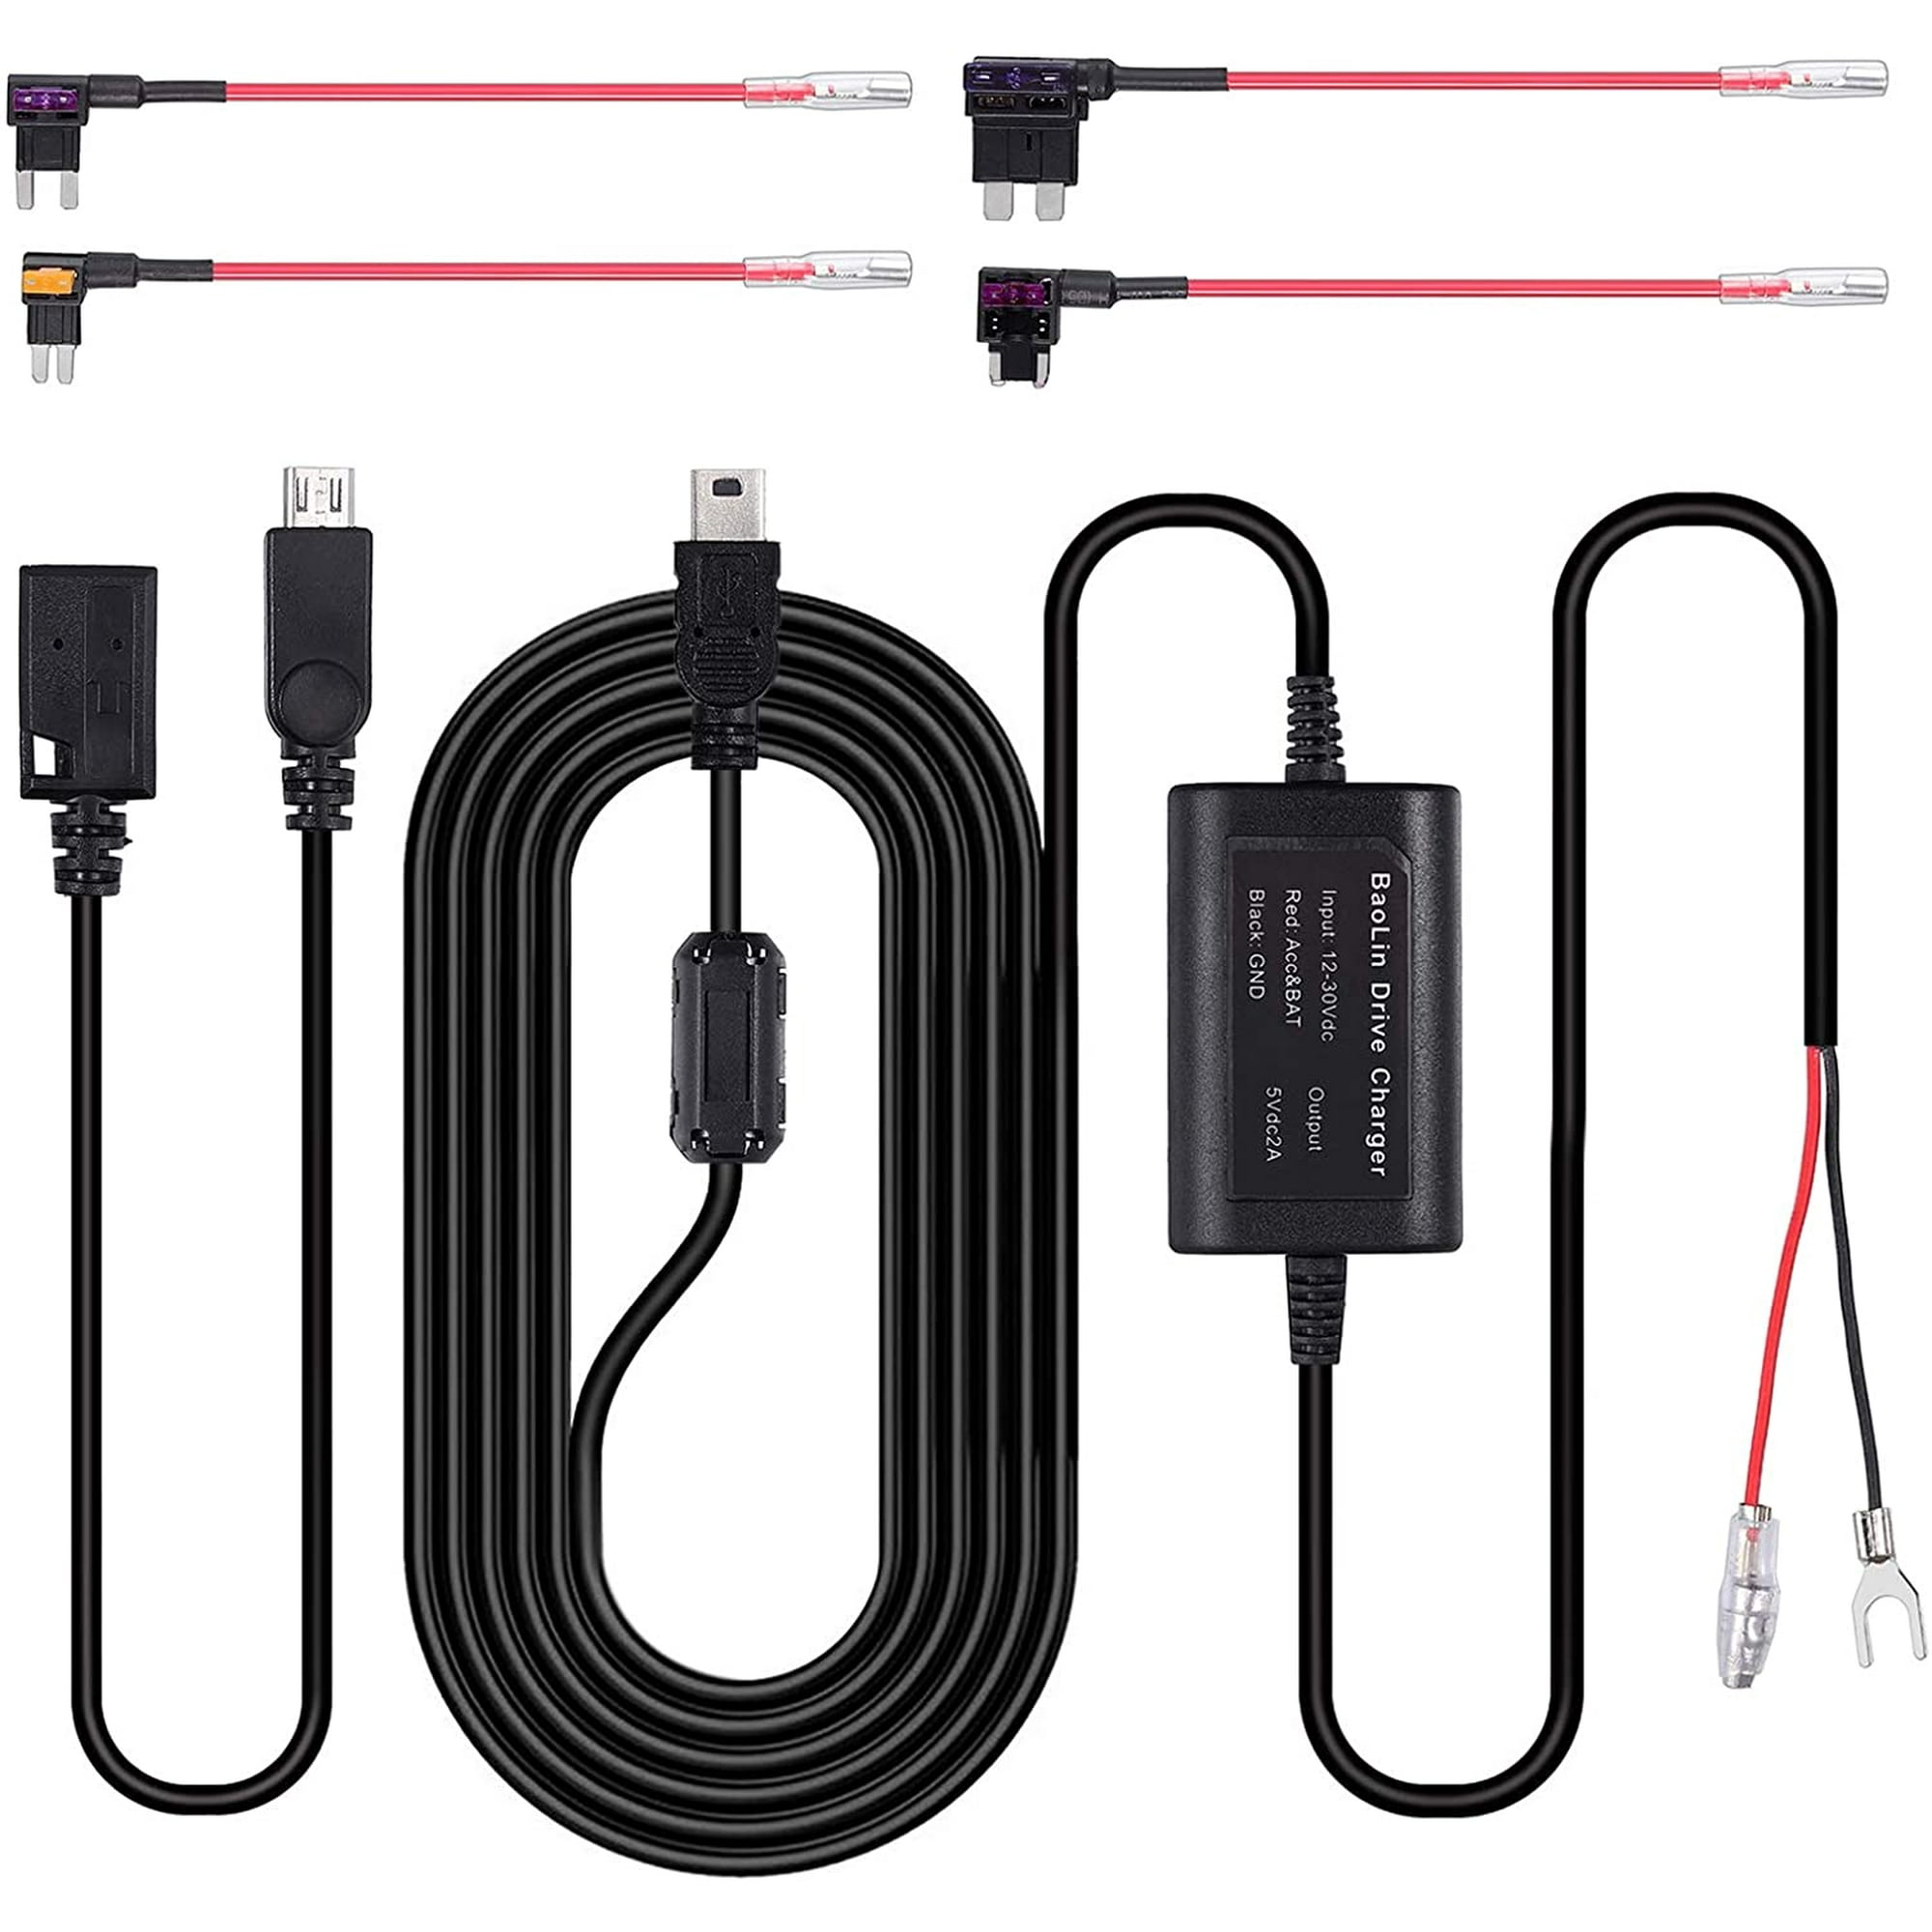 Mini USB and Micro USB Port 4m Cable with 5 Fuse SHISHUO Dash Cam Hardwire Kit